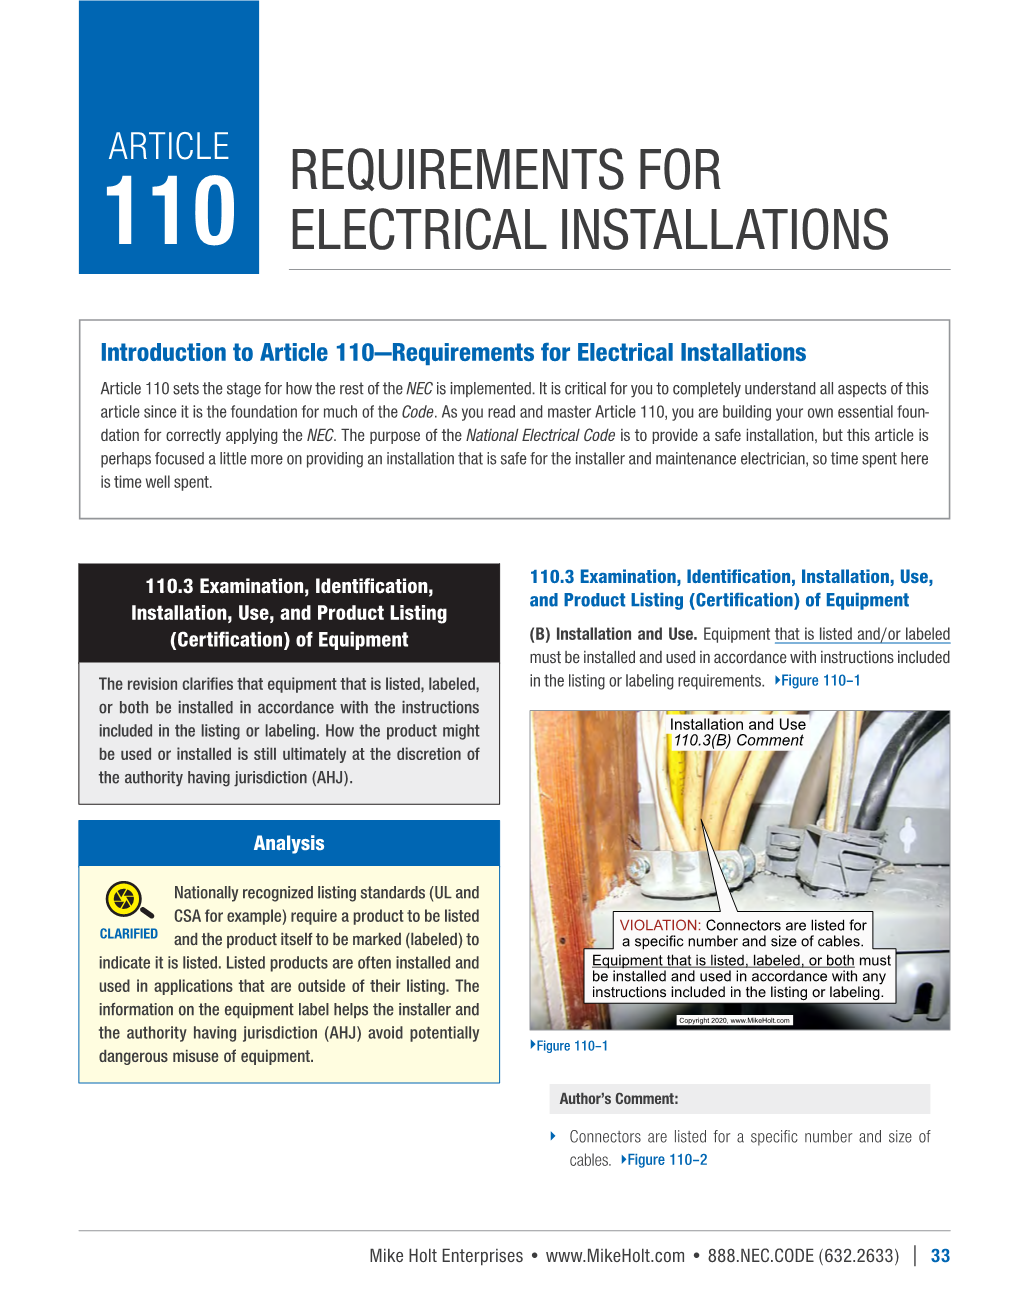 Requirements for Electrical Installations Article 110 Sets the Stage for How the Rest of the NEC Is Implemented